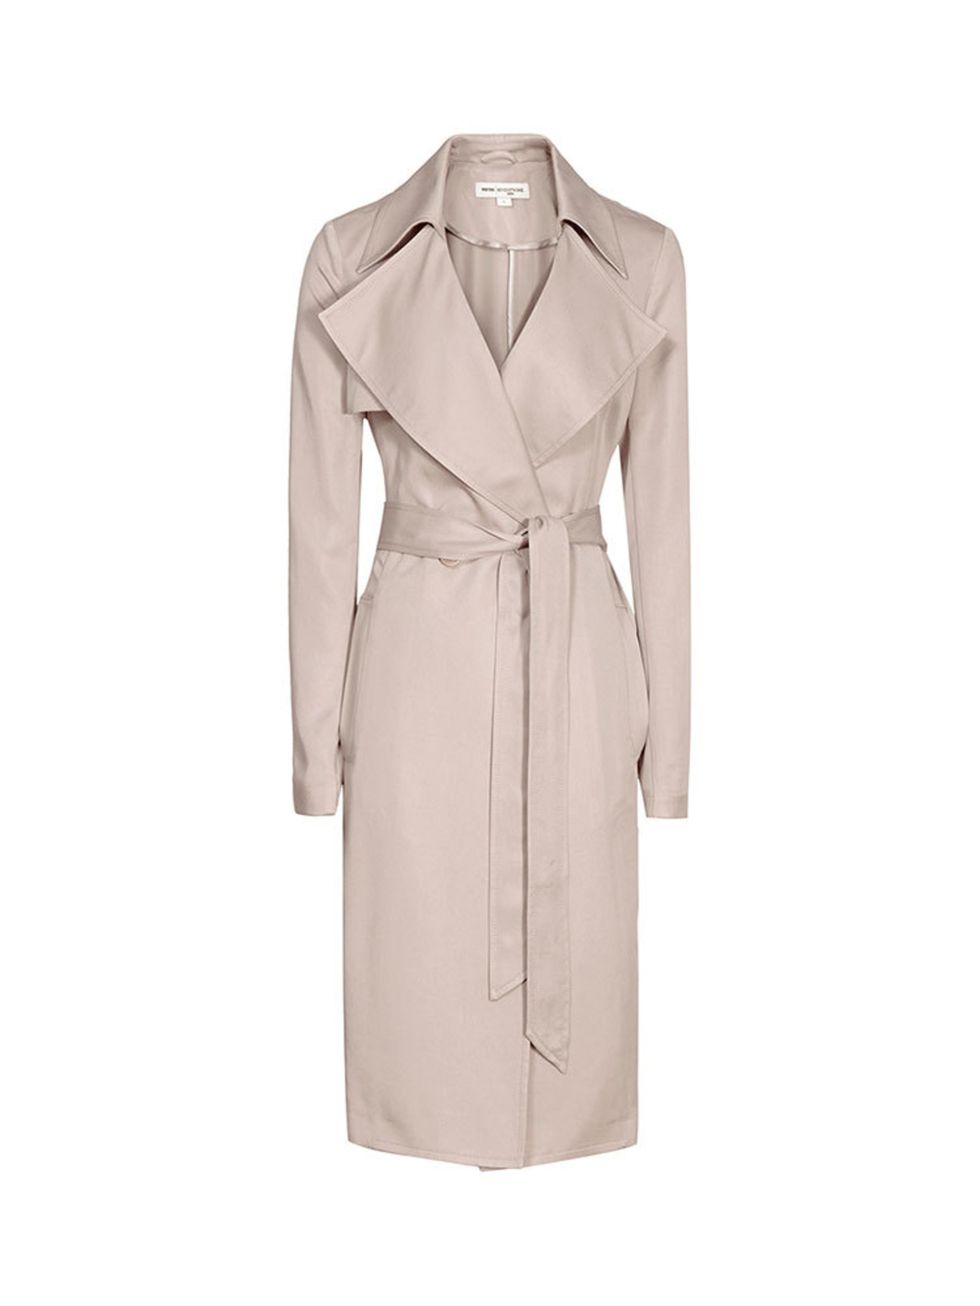 <p><a href="http://http://www.reiss.com/womens/coats-and-jackets/nonsale-coats-and-jacket/radzi/tiramisu/" target="_blank">Reiss relaxed trench coat</a>, £245</p>